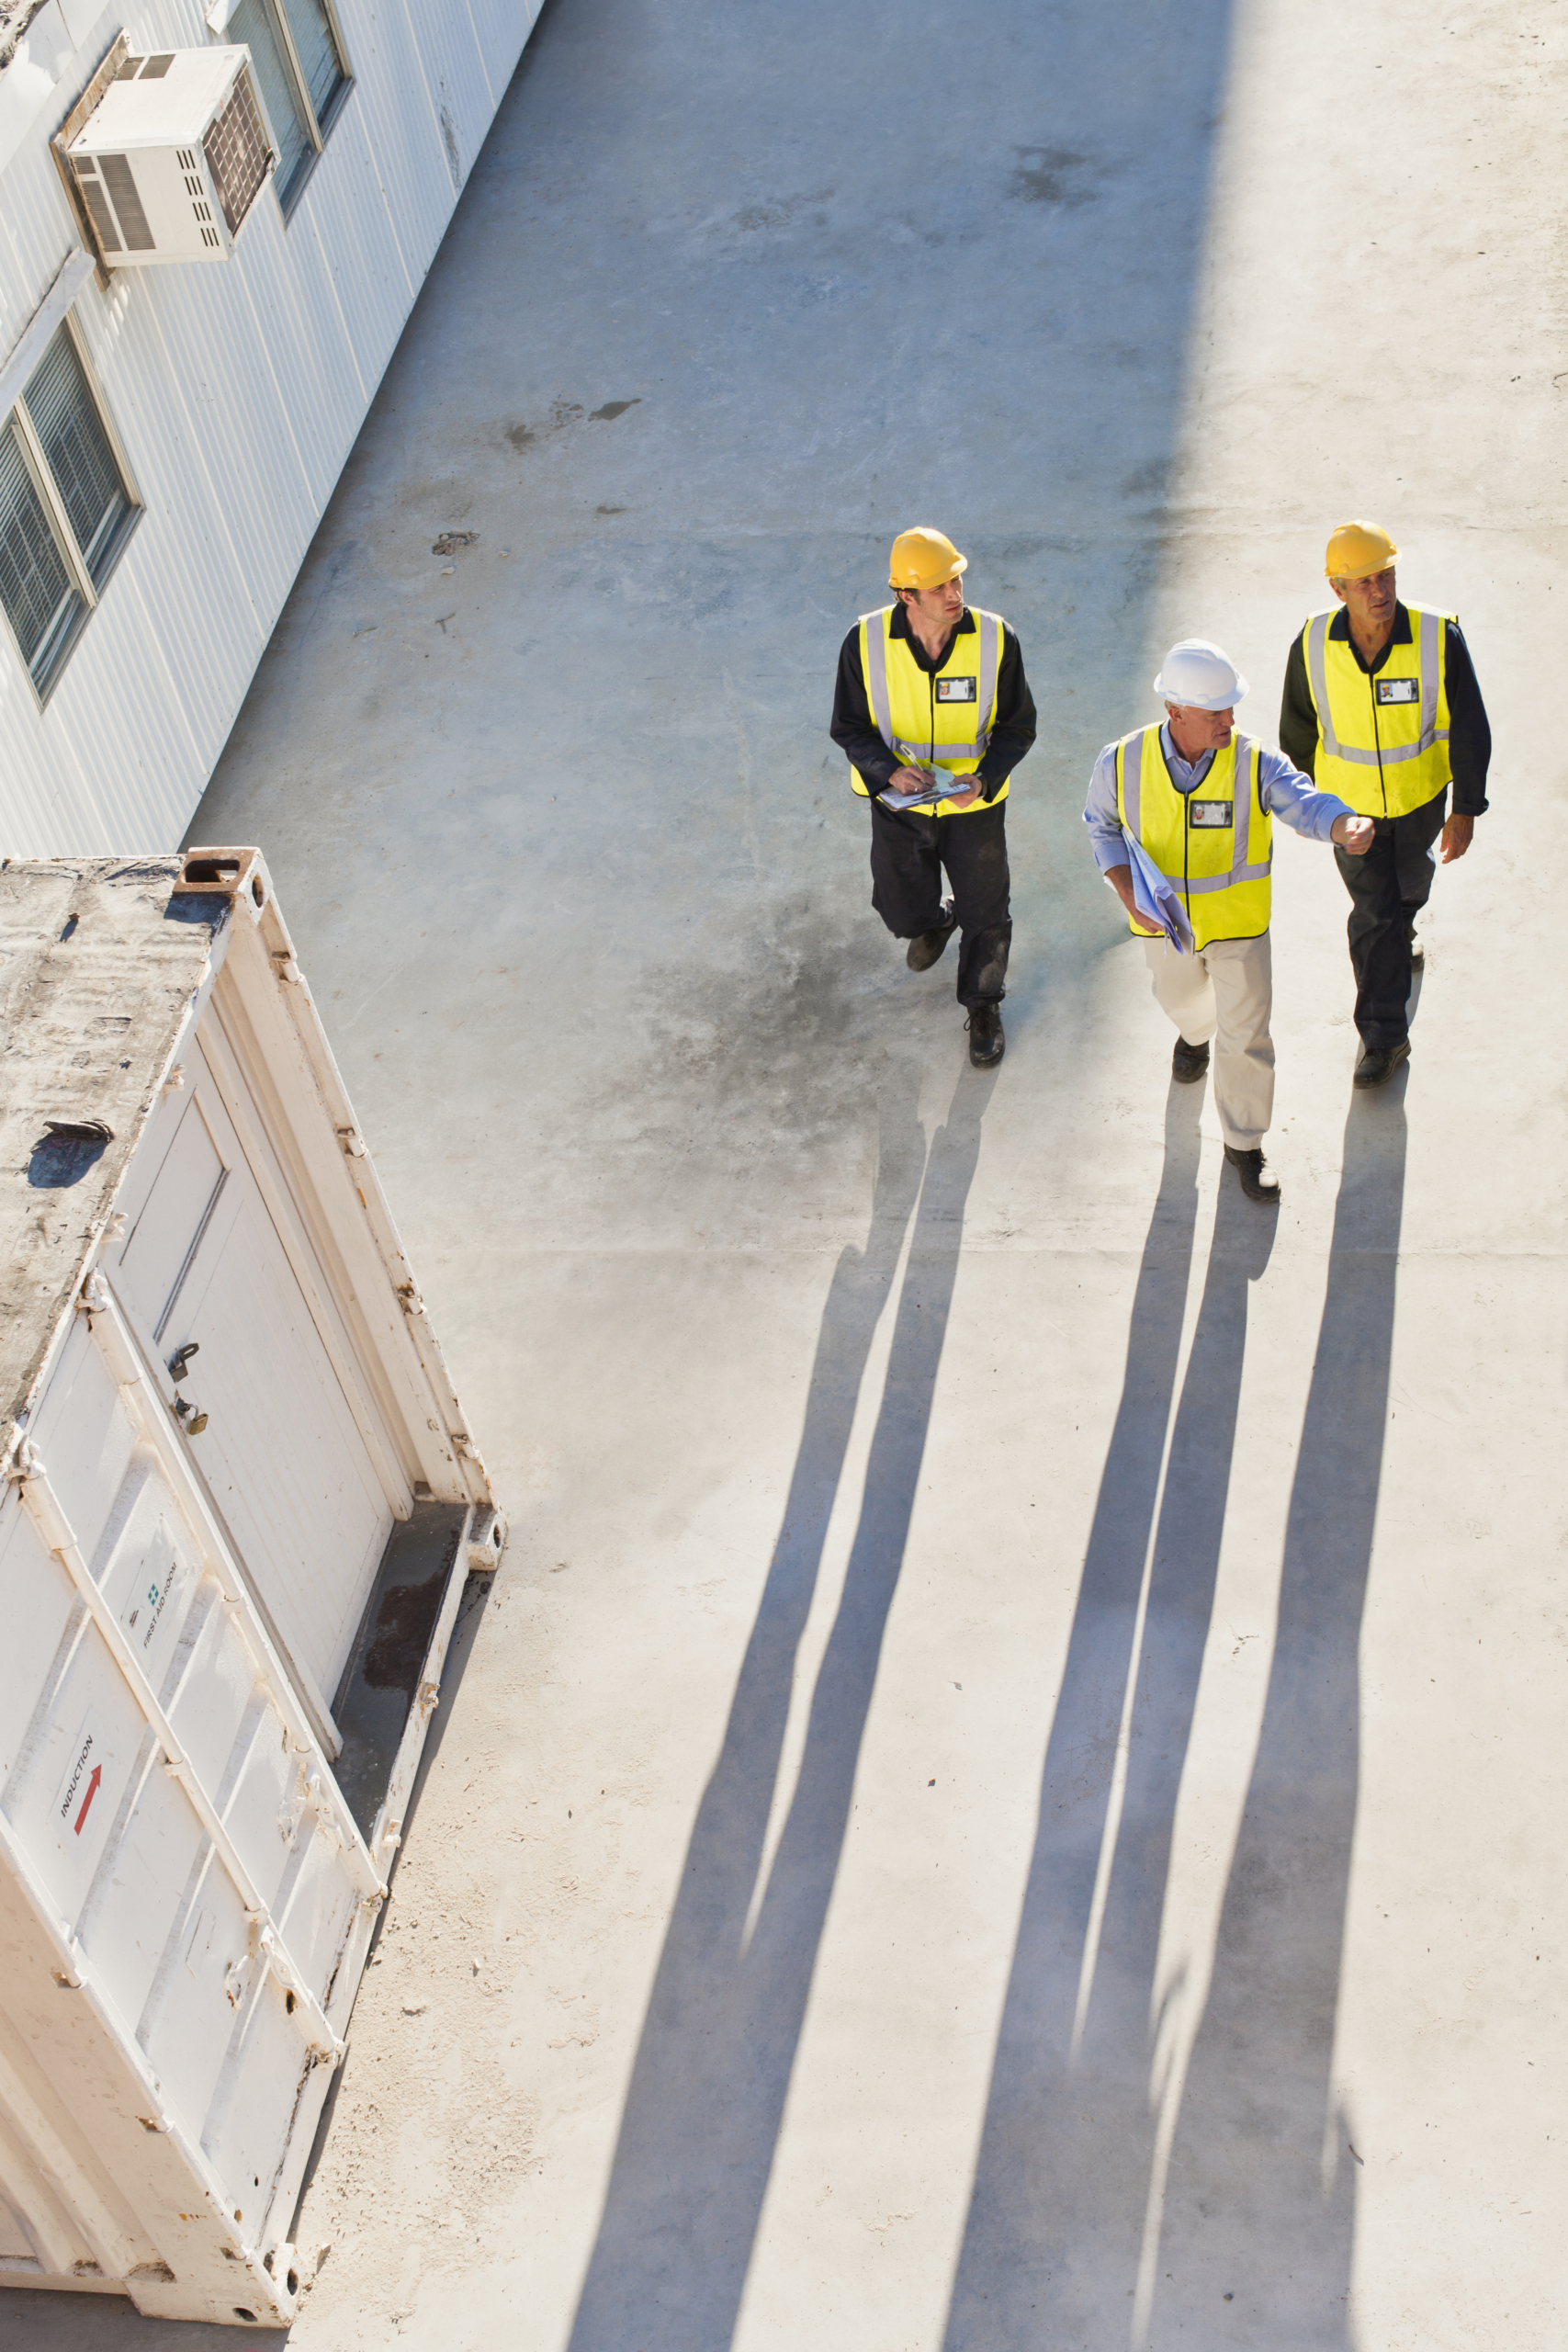 Three engineers with safety hats walking through a construction site